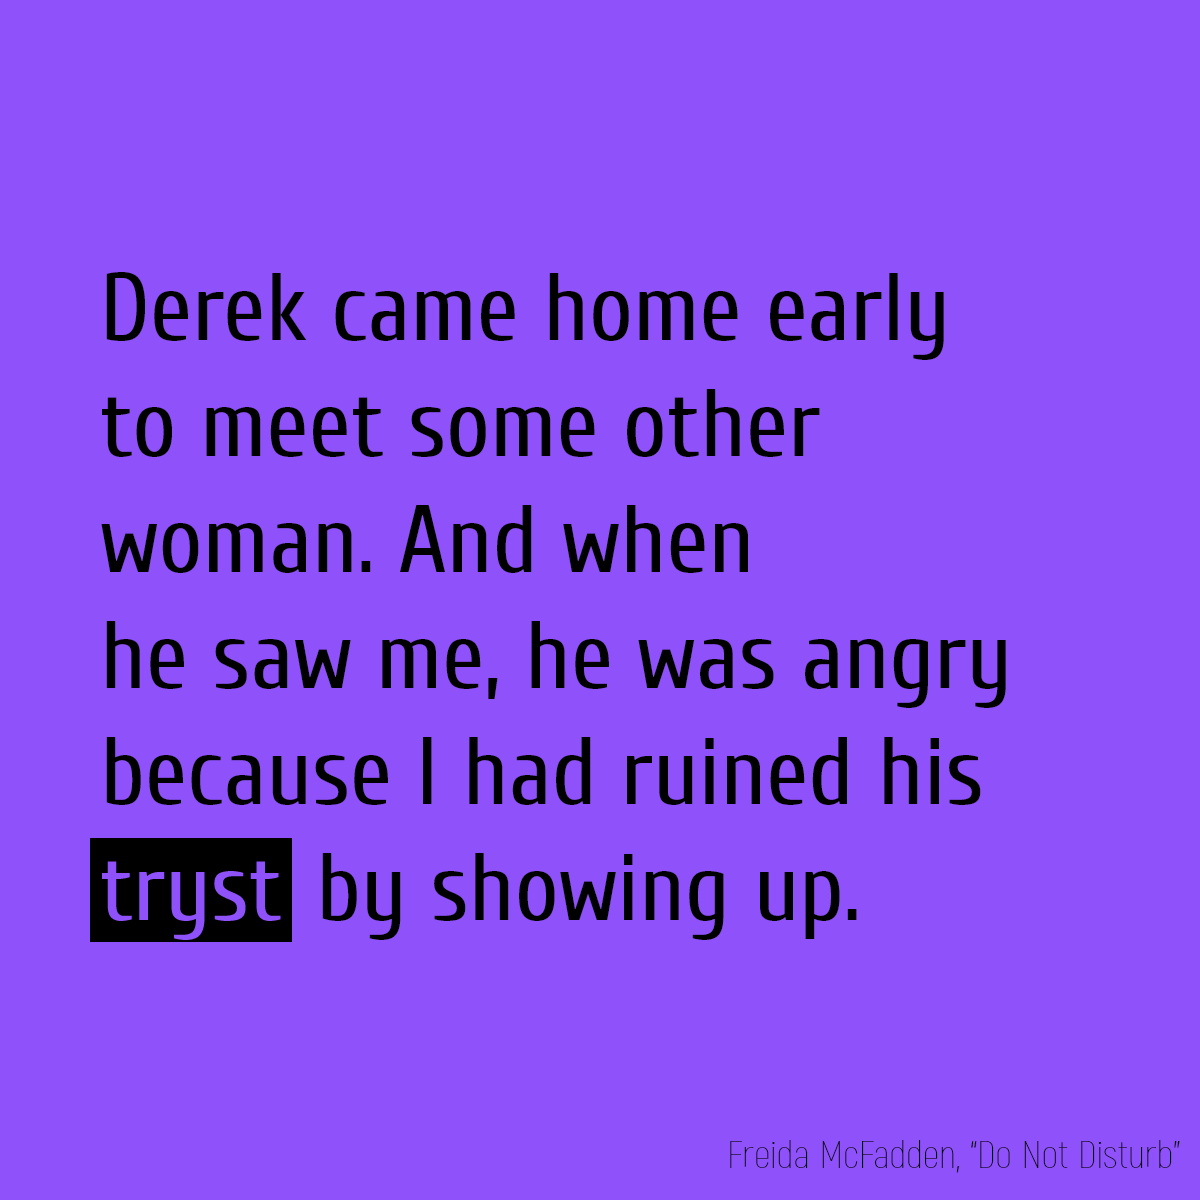 Derek came home early to meet some other woman. And when he saw me, he was angry because I had ruined his **tryst** by showing up.